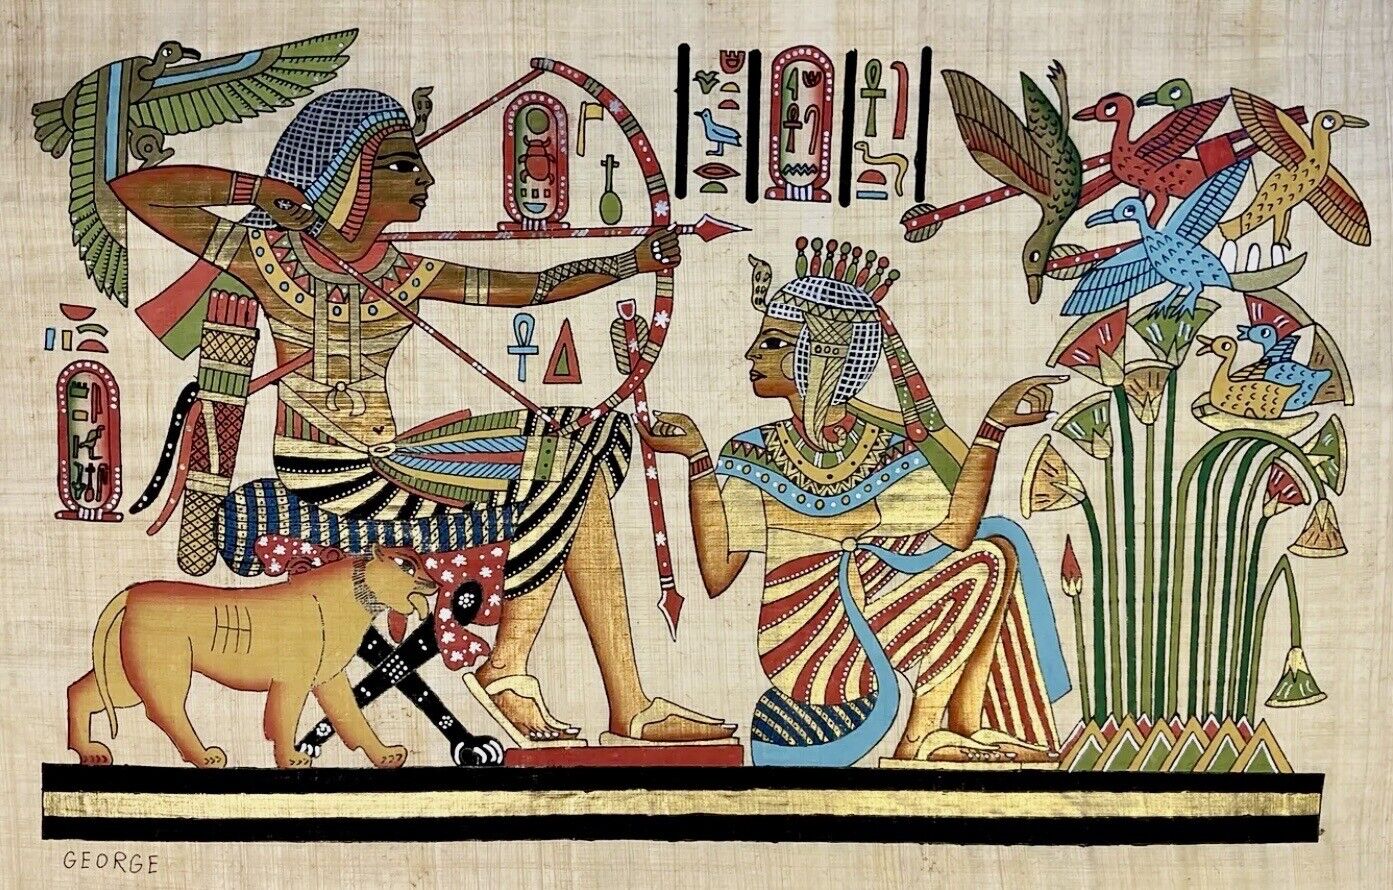 Authentic Hand Painted Ancient Egyptian Papyrus -King Tut & Queen Hunting 16x24”